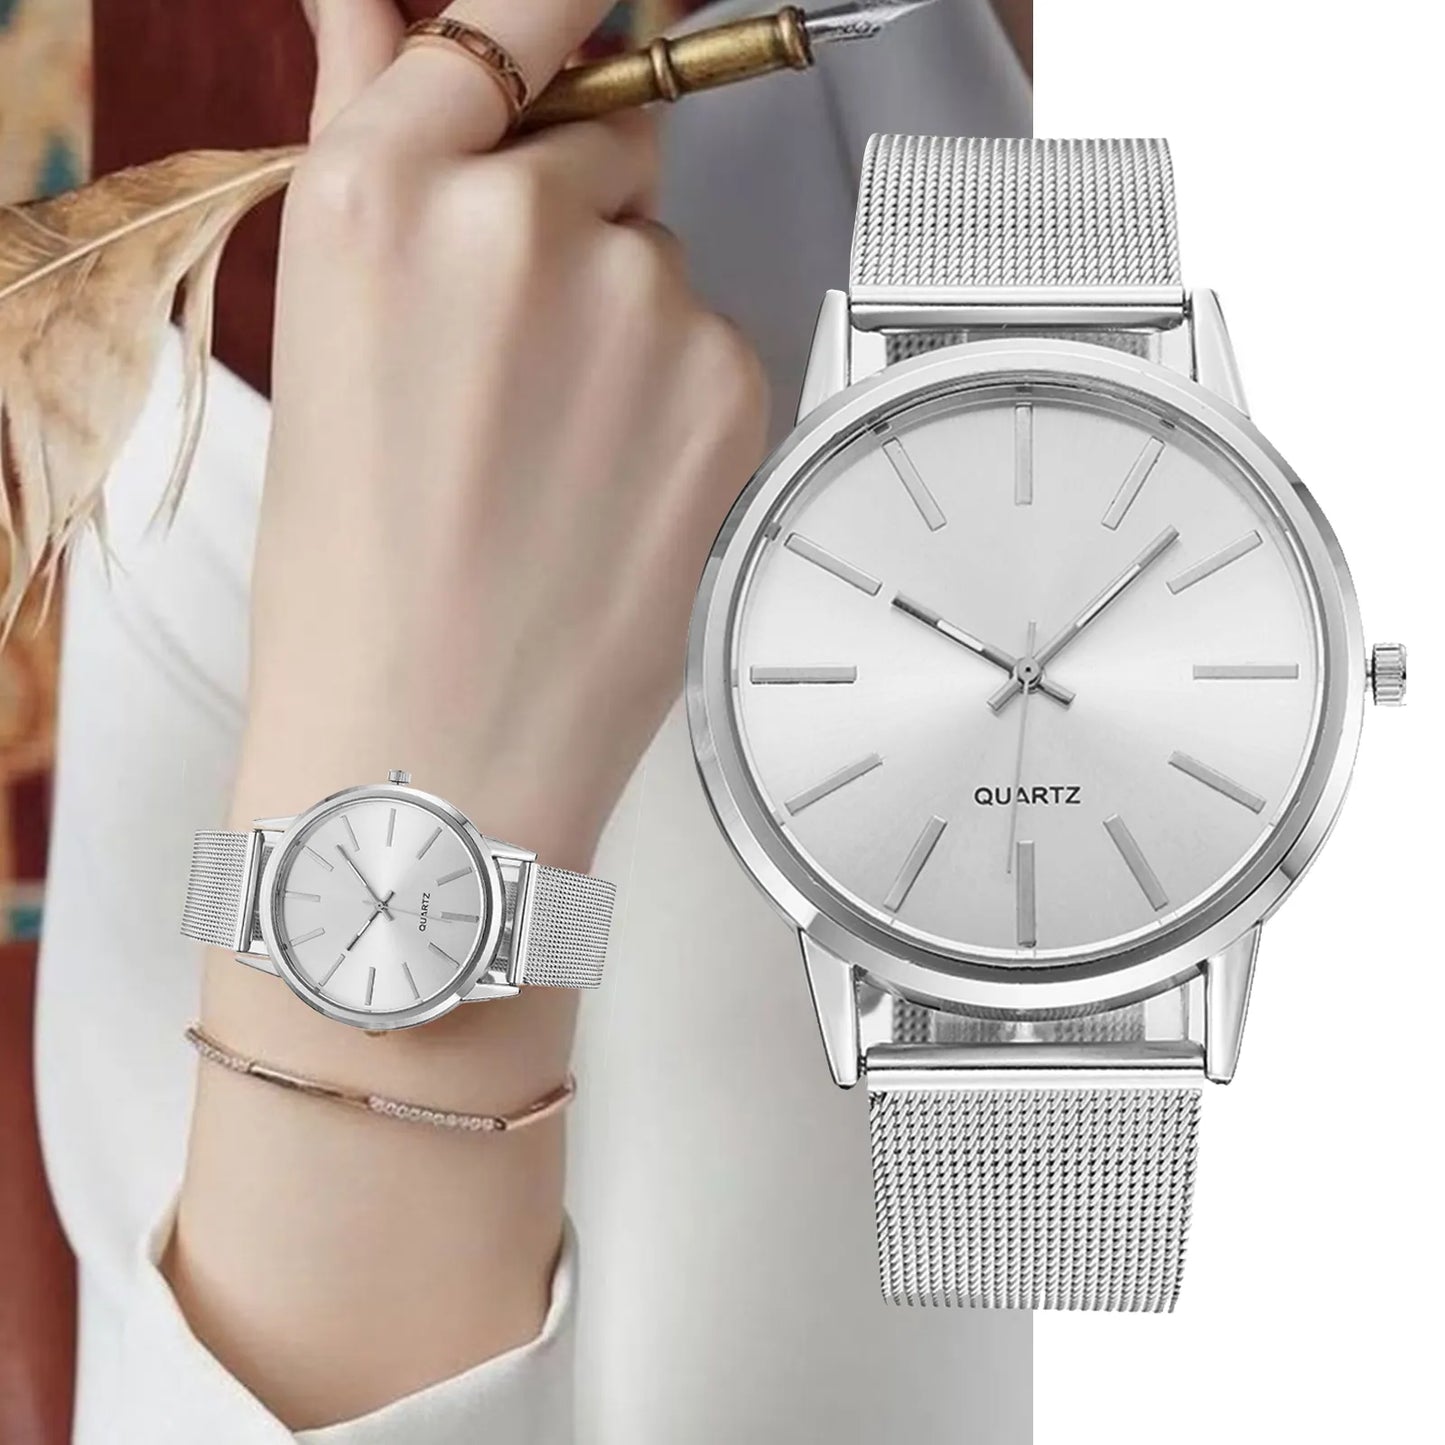 Minimalist Silver Women's Business Watch with Leather Strap